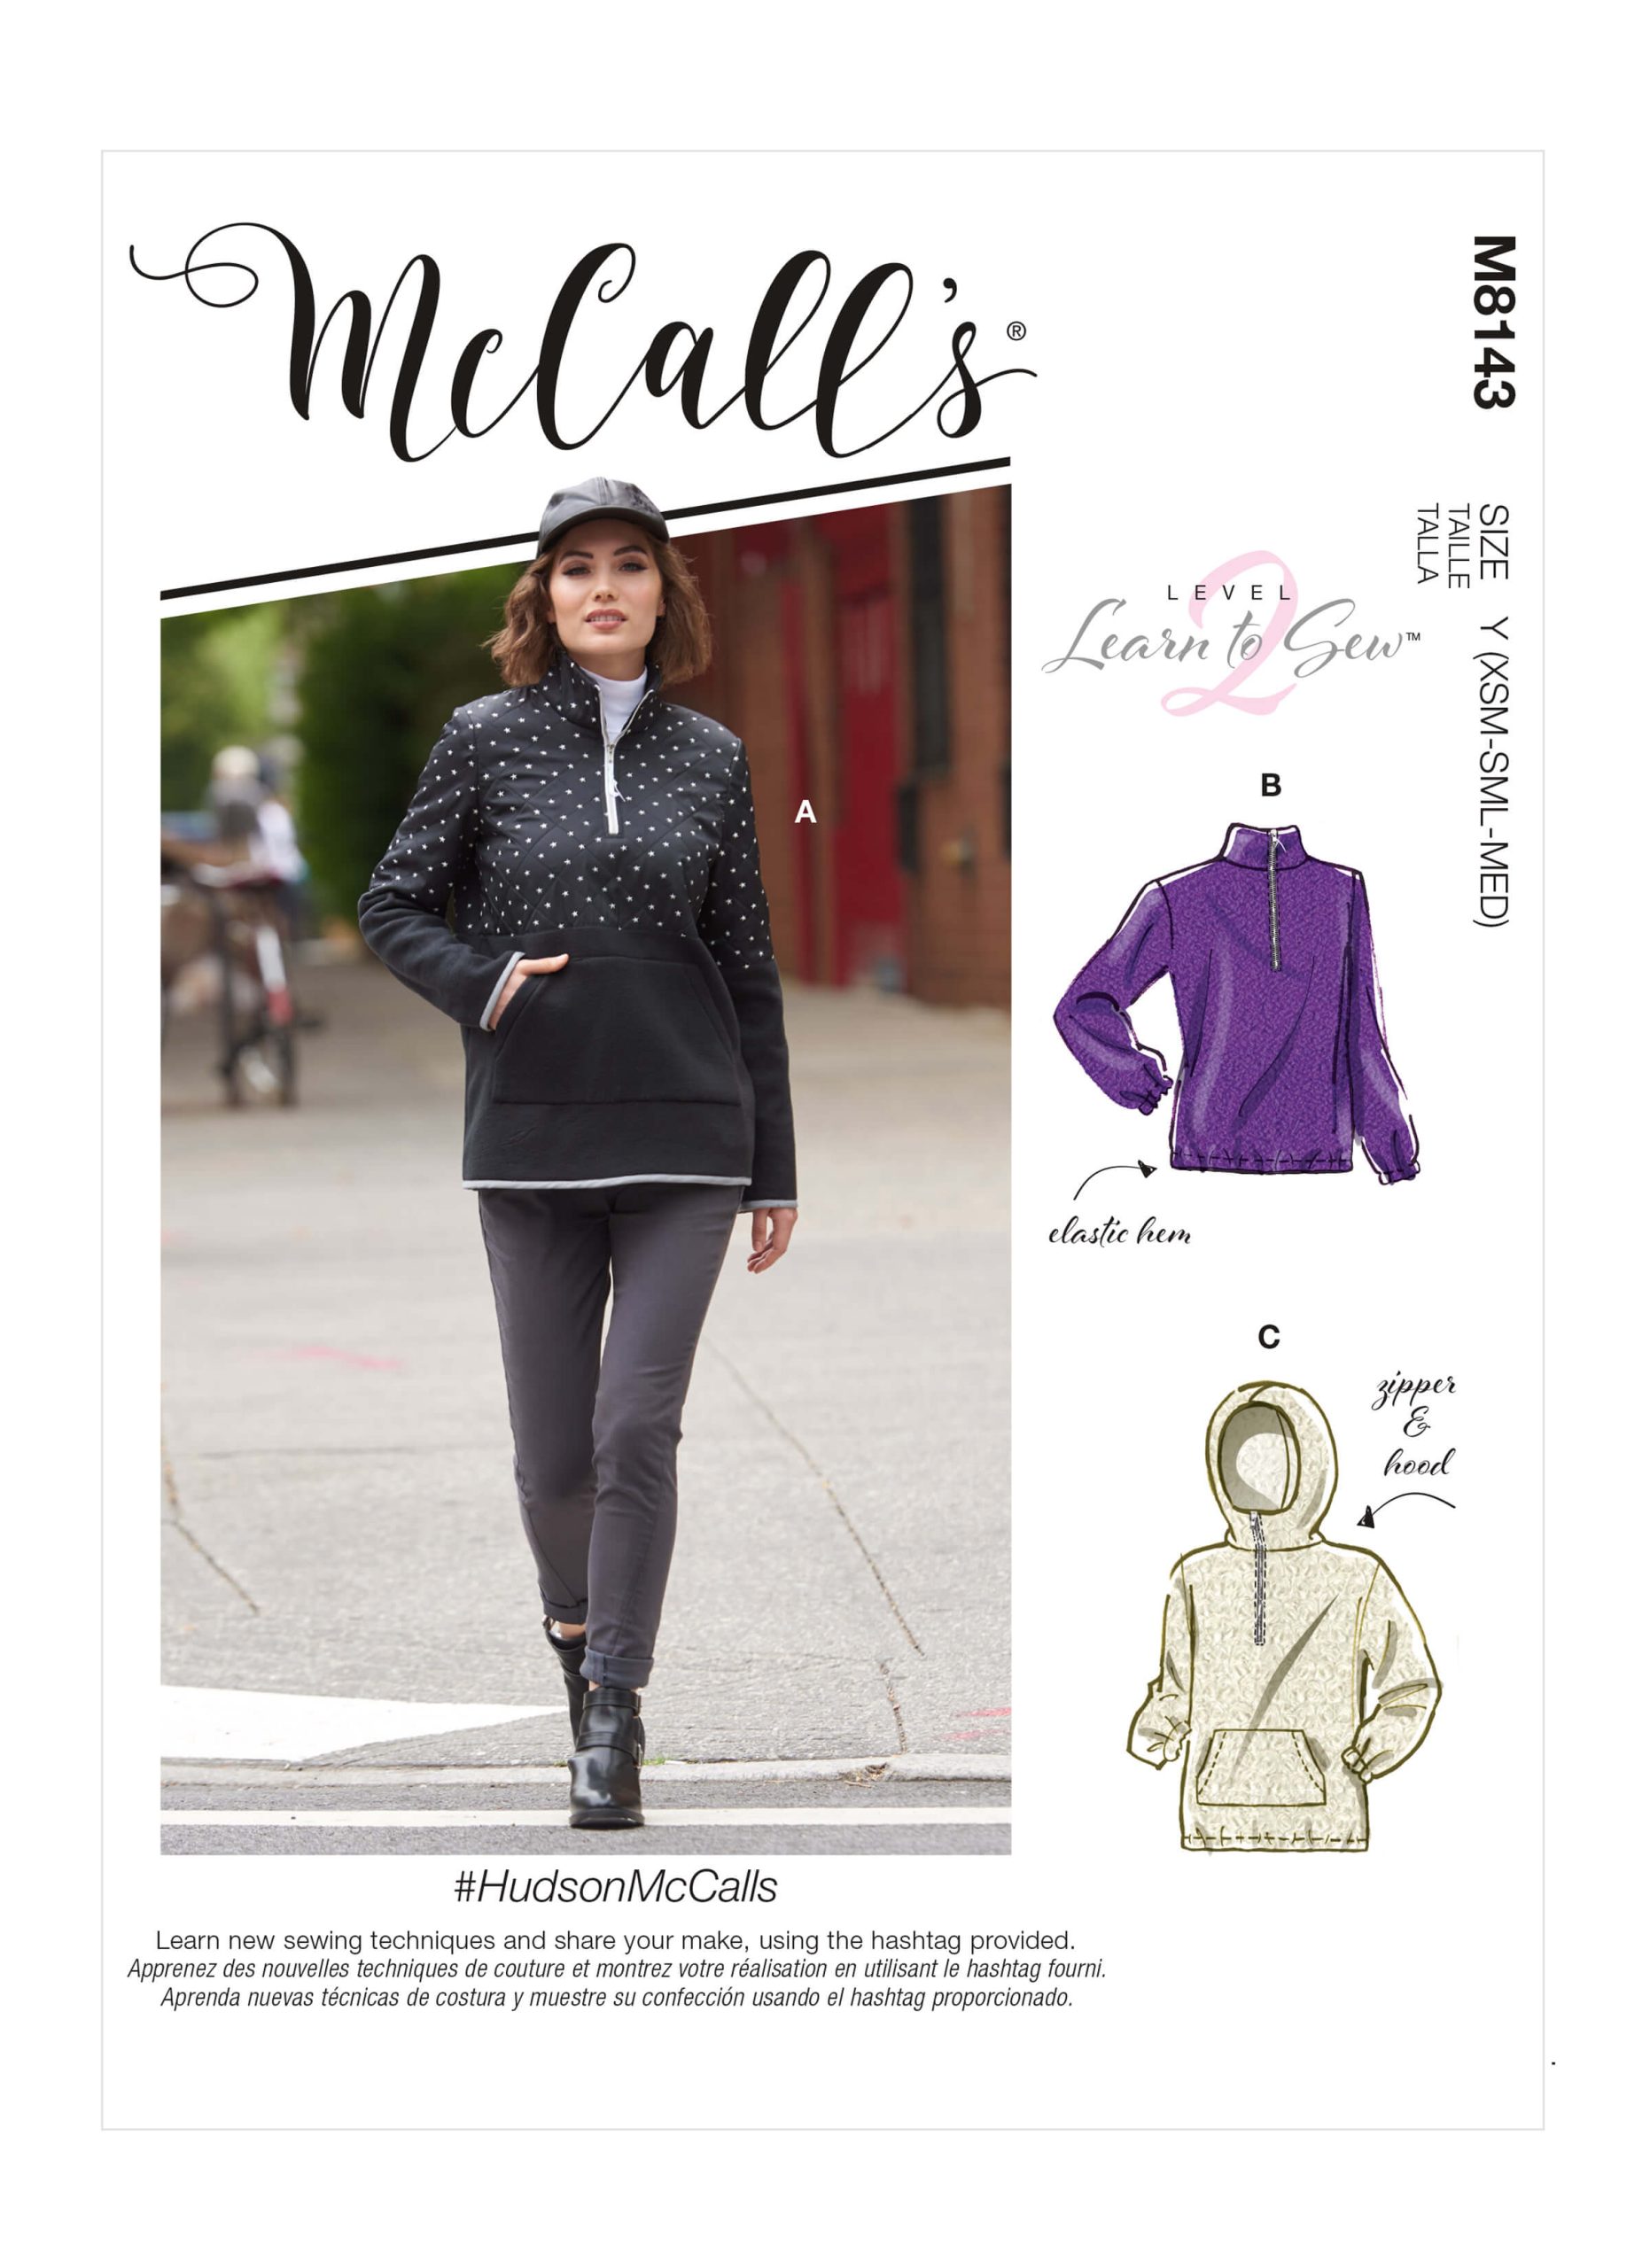 McCall's Sewing Pattern M8143 Misses' Tops #HudsonMcCalls Learn to Sew Level 2